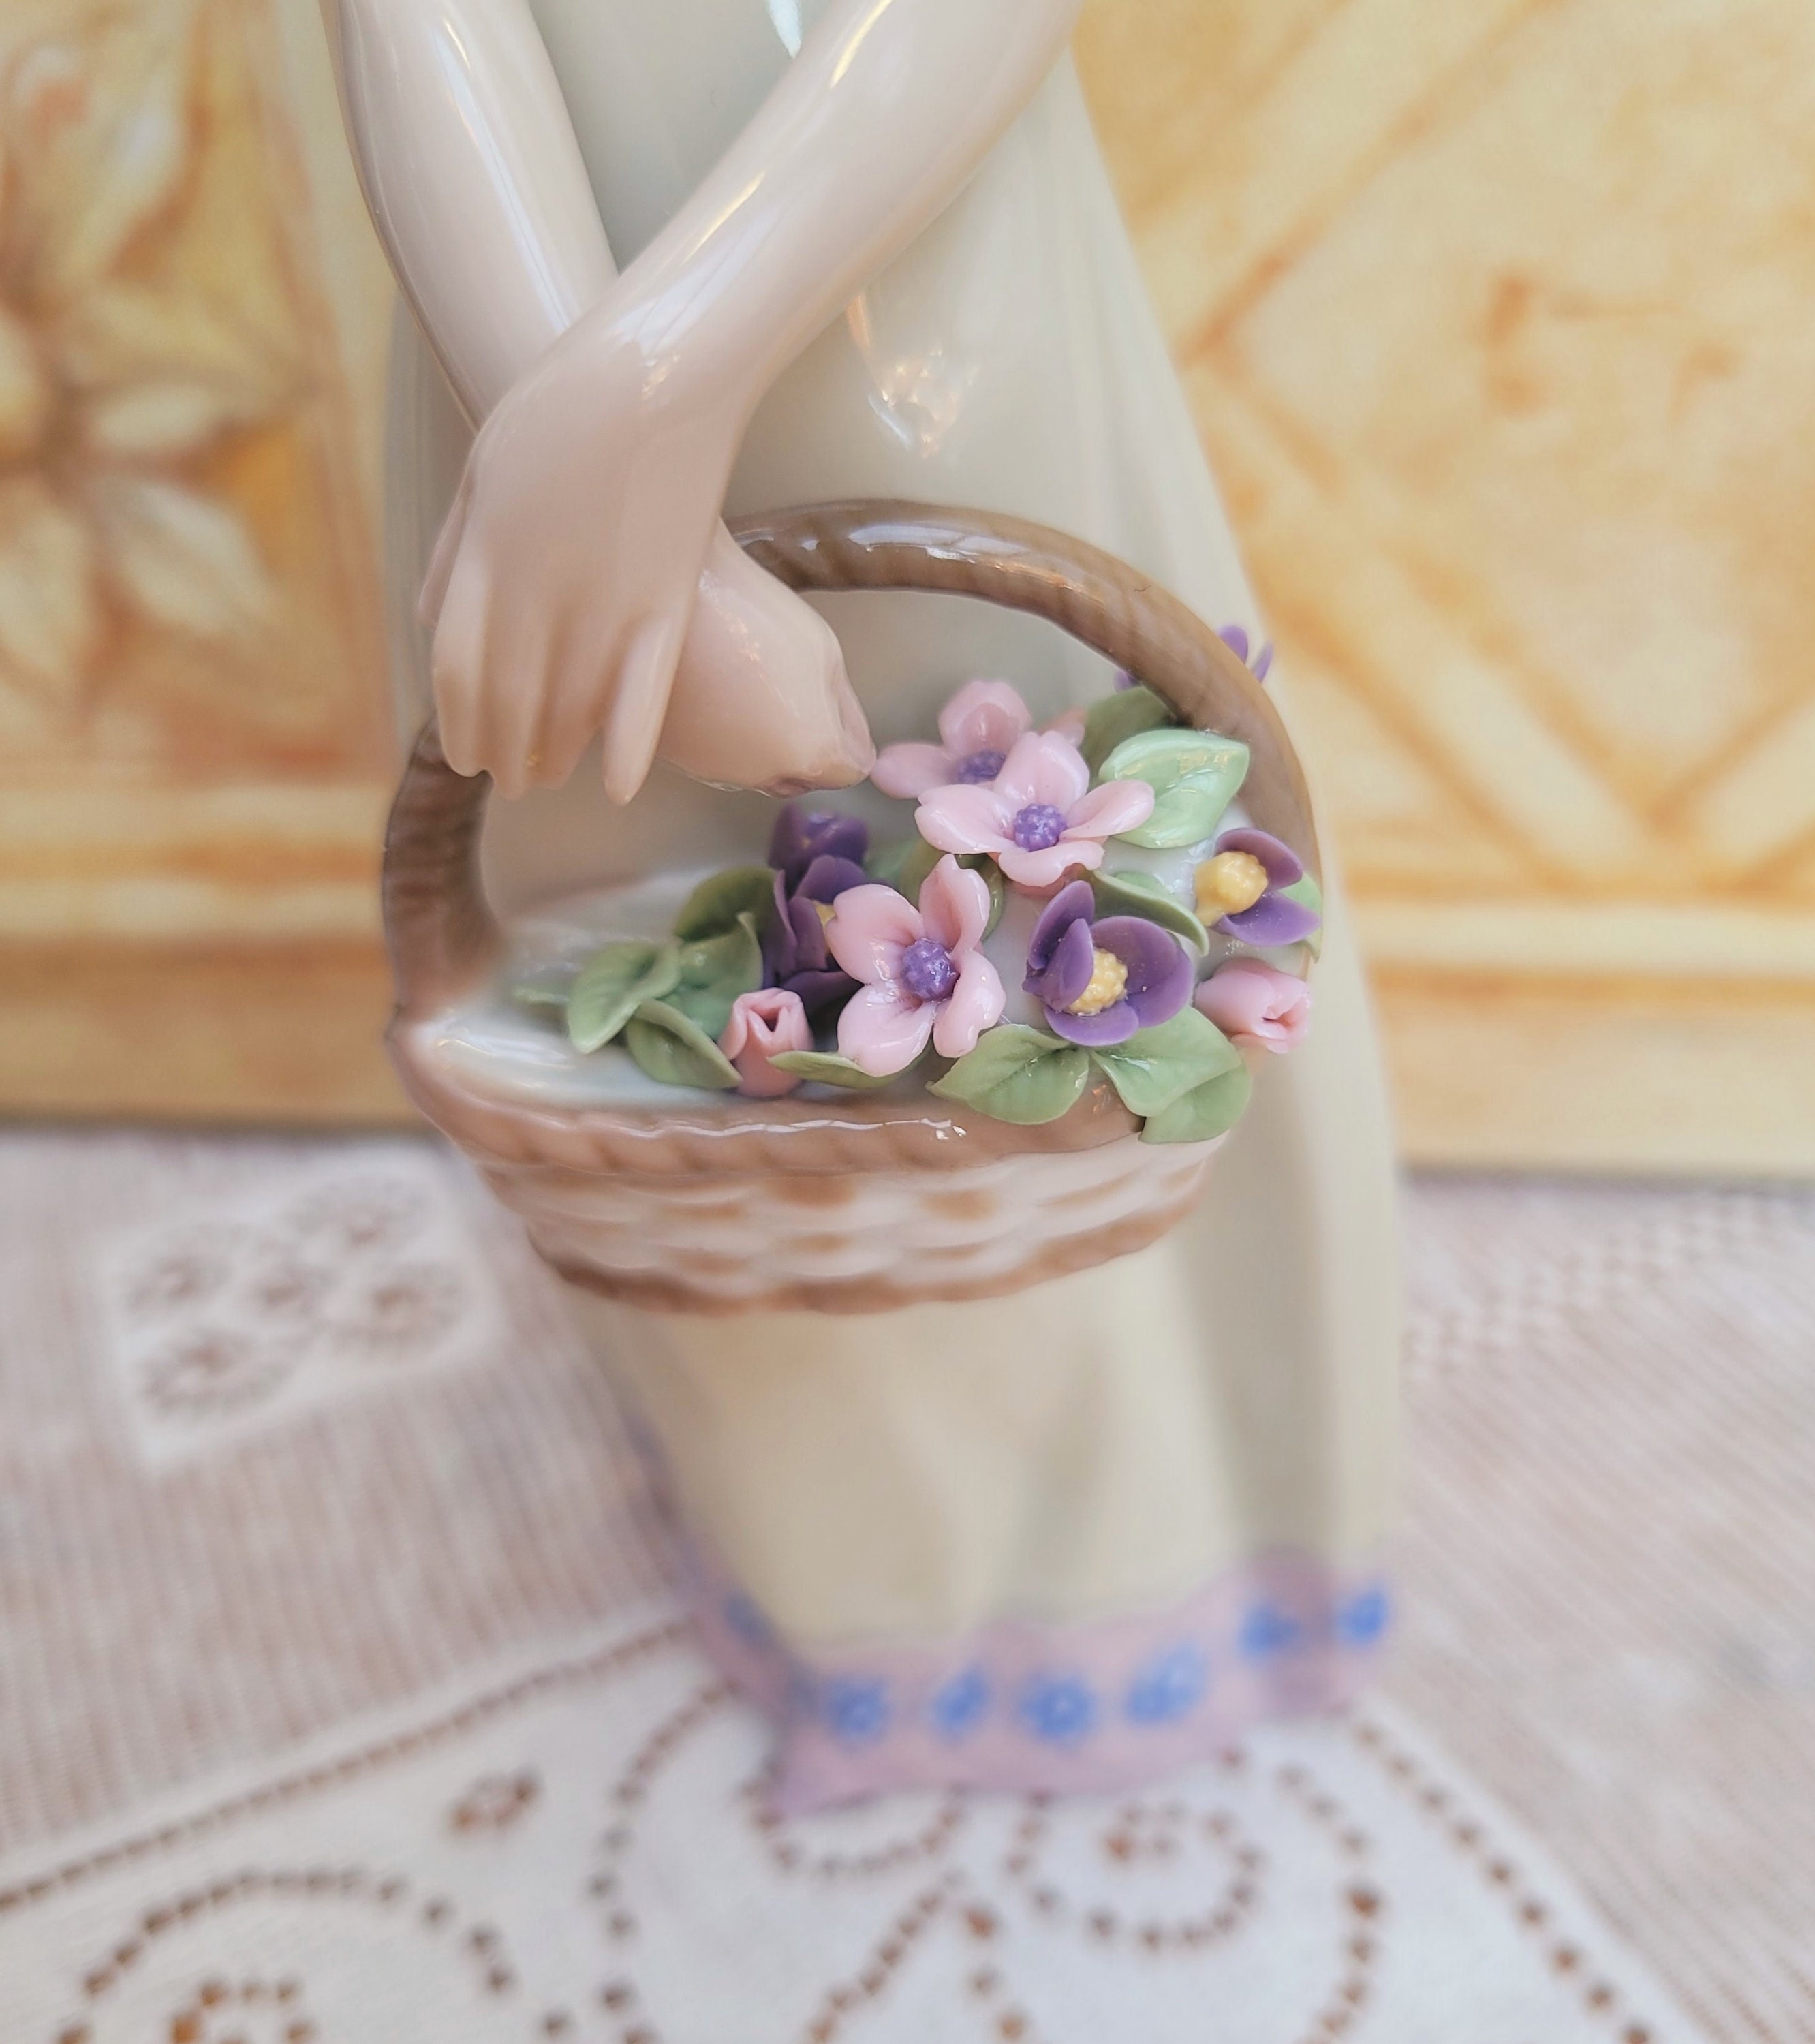 Flat Basket of Flowers Lladro - 01001575 - Functional Lladro Figurines &  Collectibles